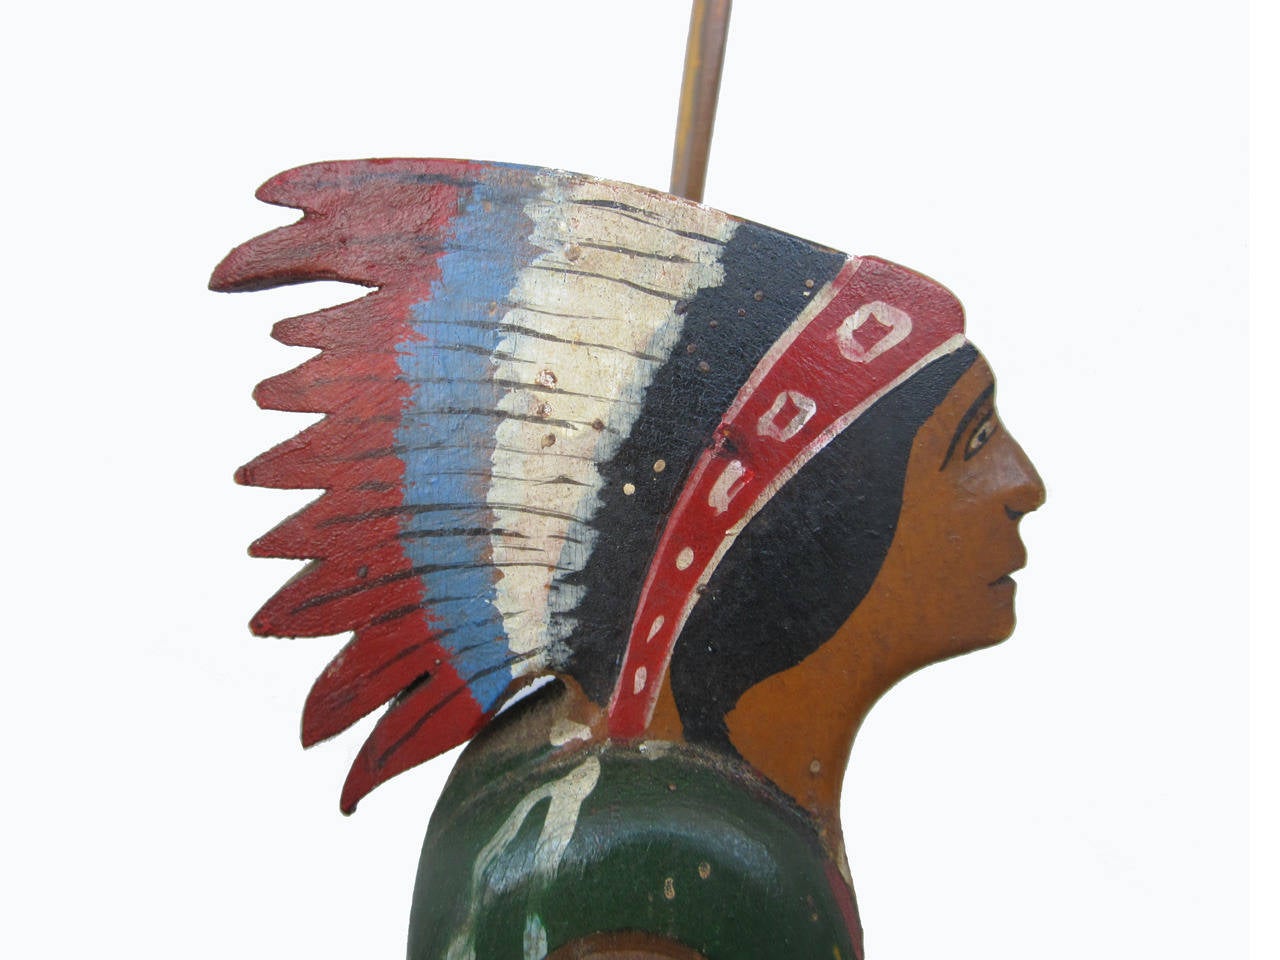 Double sided Indian in a canoe whirligig with painted headdress, sun designs on the paddles, decorated canoe border, new table stand (not shown), circa 1930.